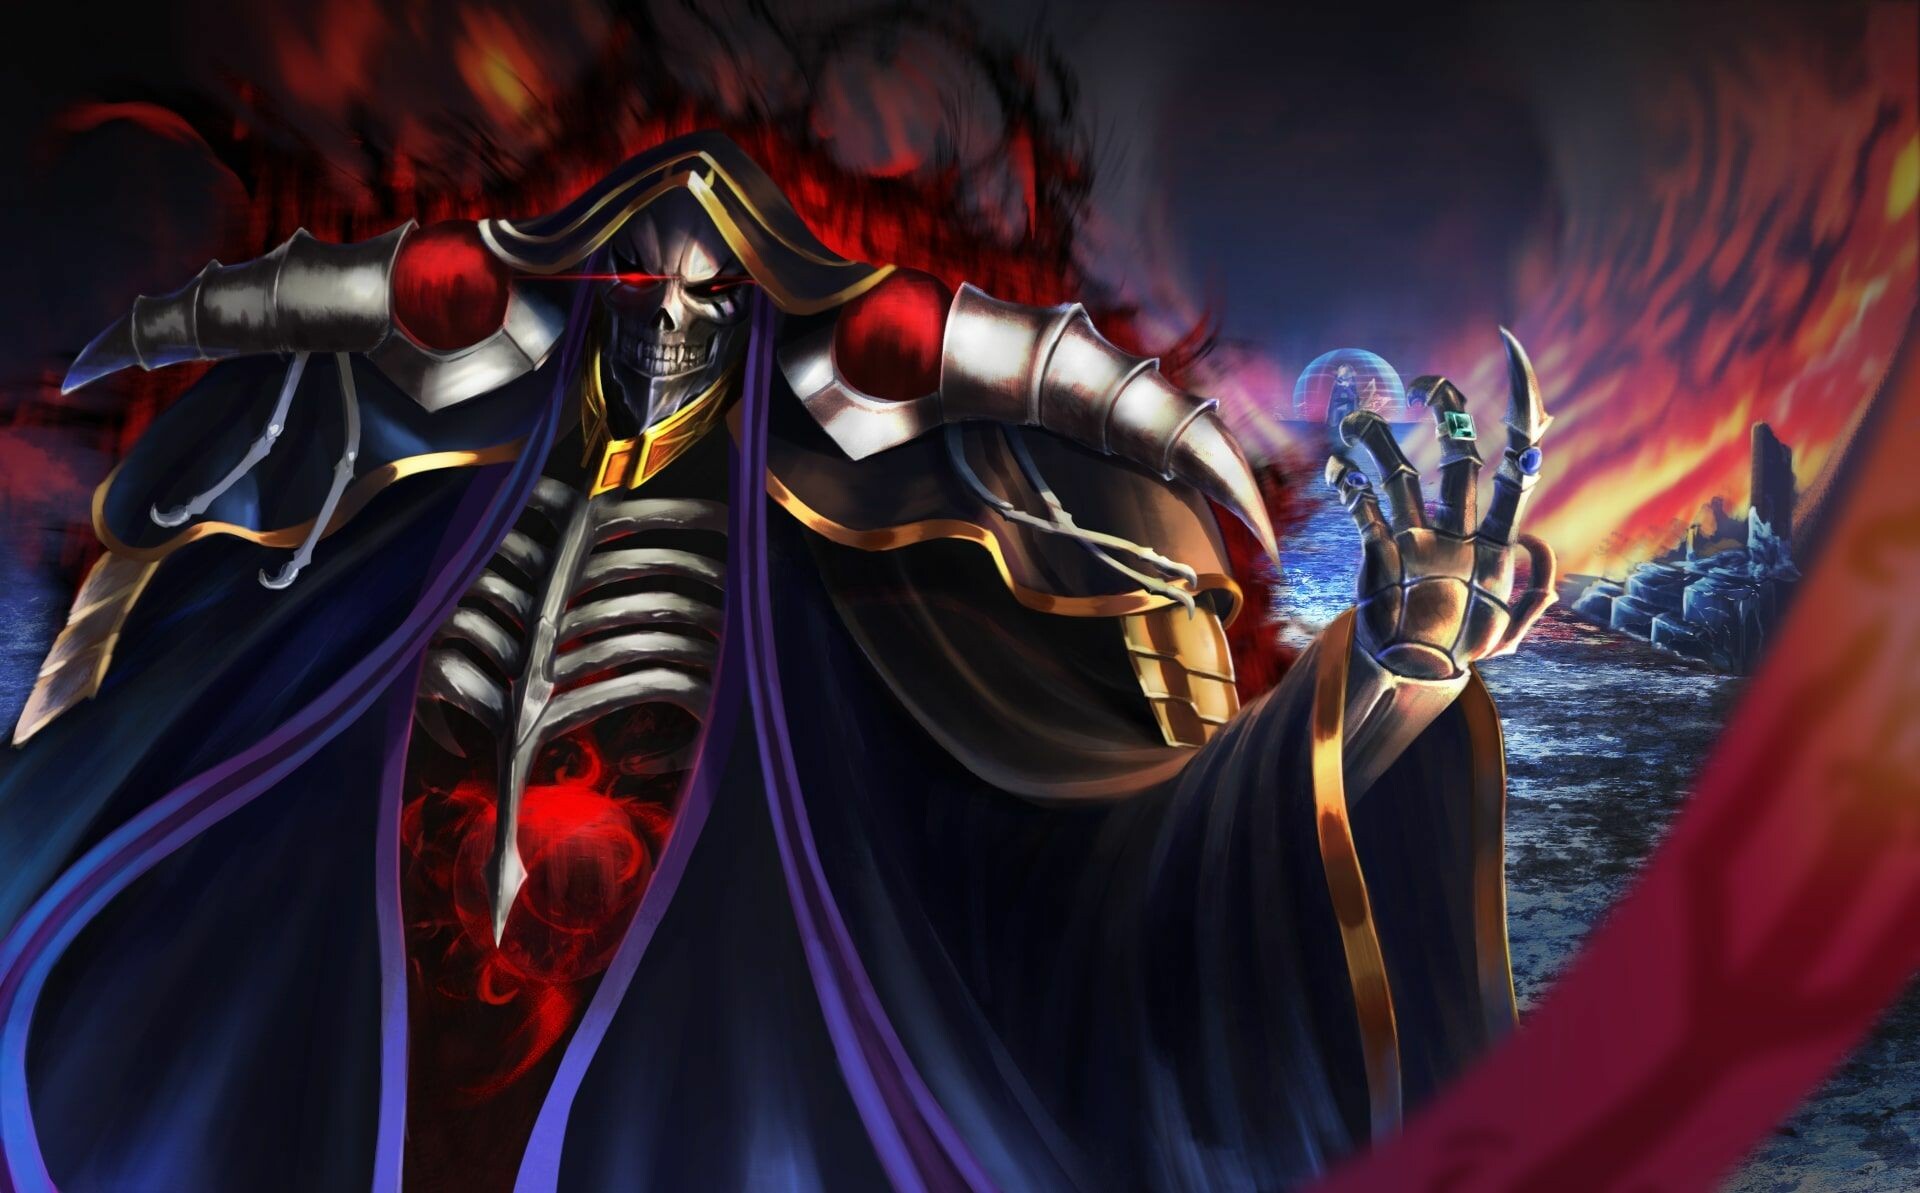 Overlord: Anime, A third season premiered on July 10, 2018, Ainz Ooal Gown. 1920x1200 HD Wallpaper.